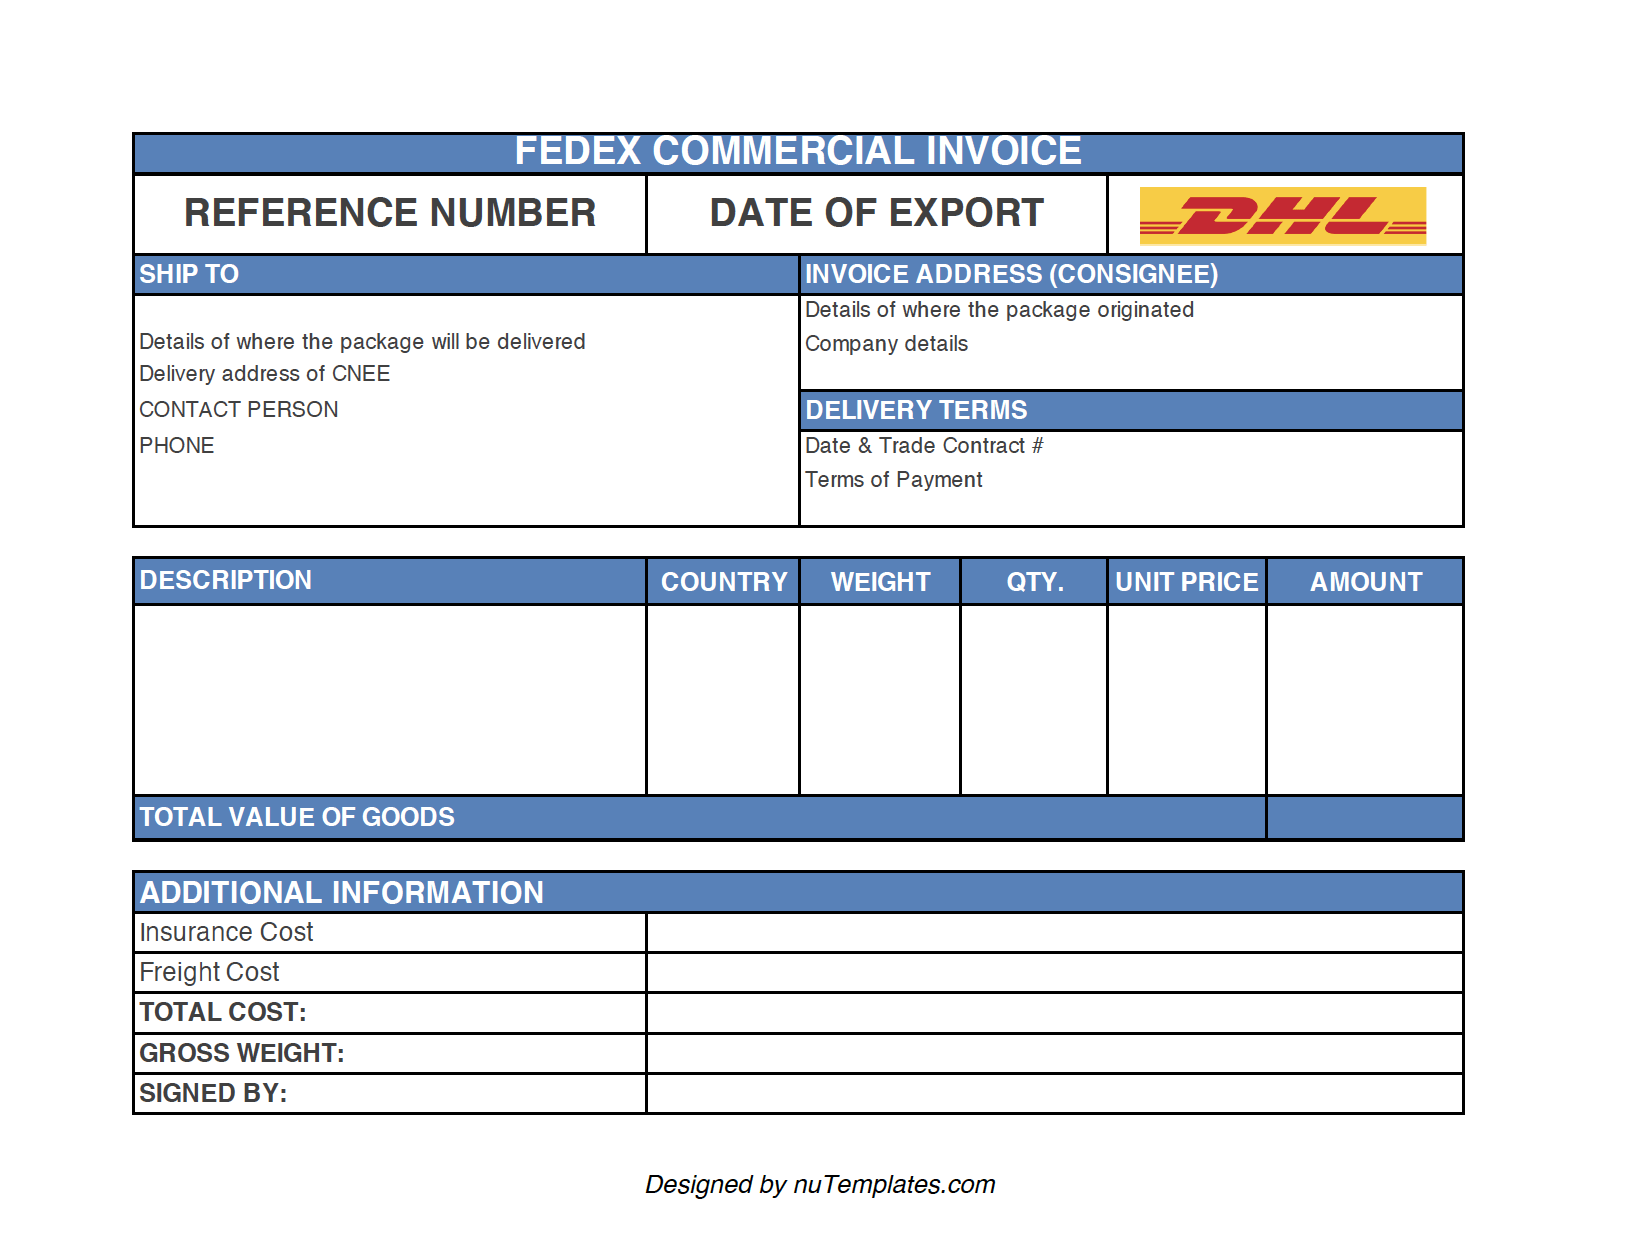 DHL commercial invoice template img